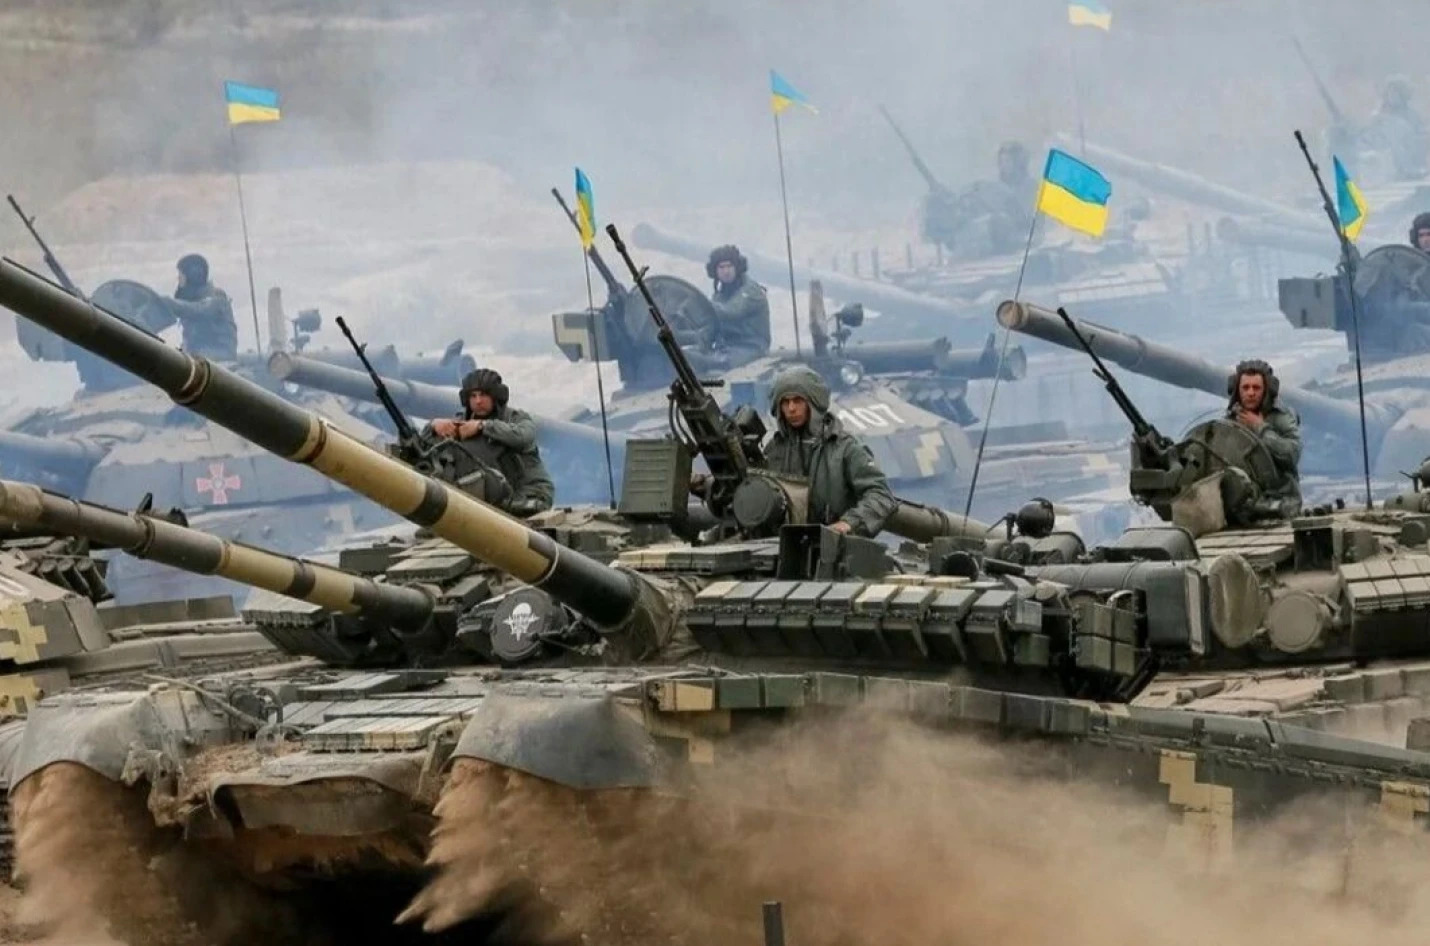 “The Time Has Come”: Ukraine’s Possible Counteroffensive Amid Ongoing Conflict